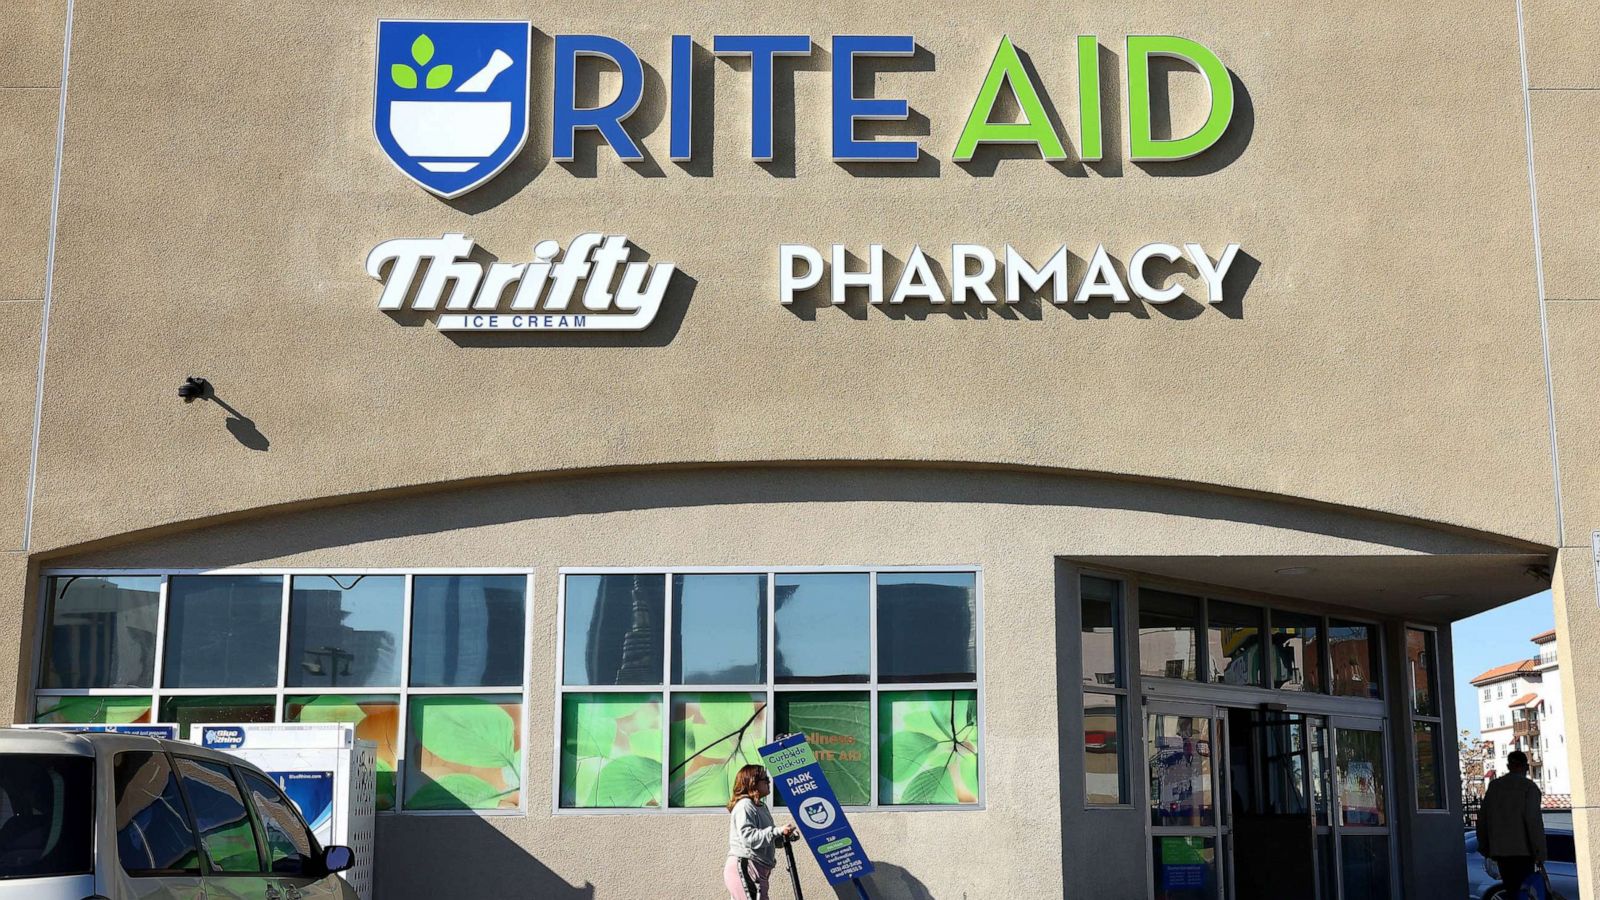 Pennsylvania-based pharmacy, Rite Aid, files for bankruptcy